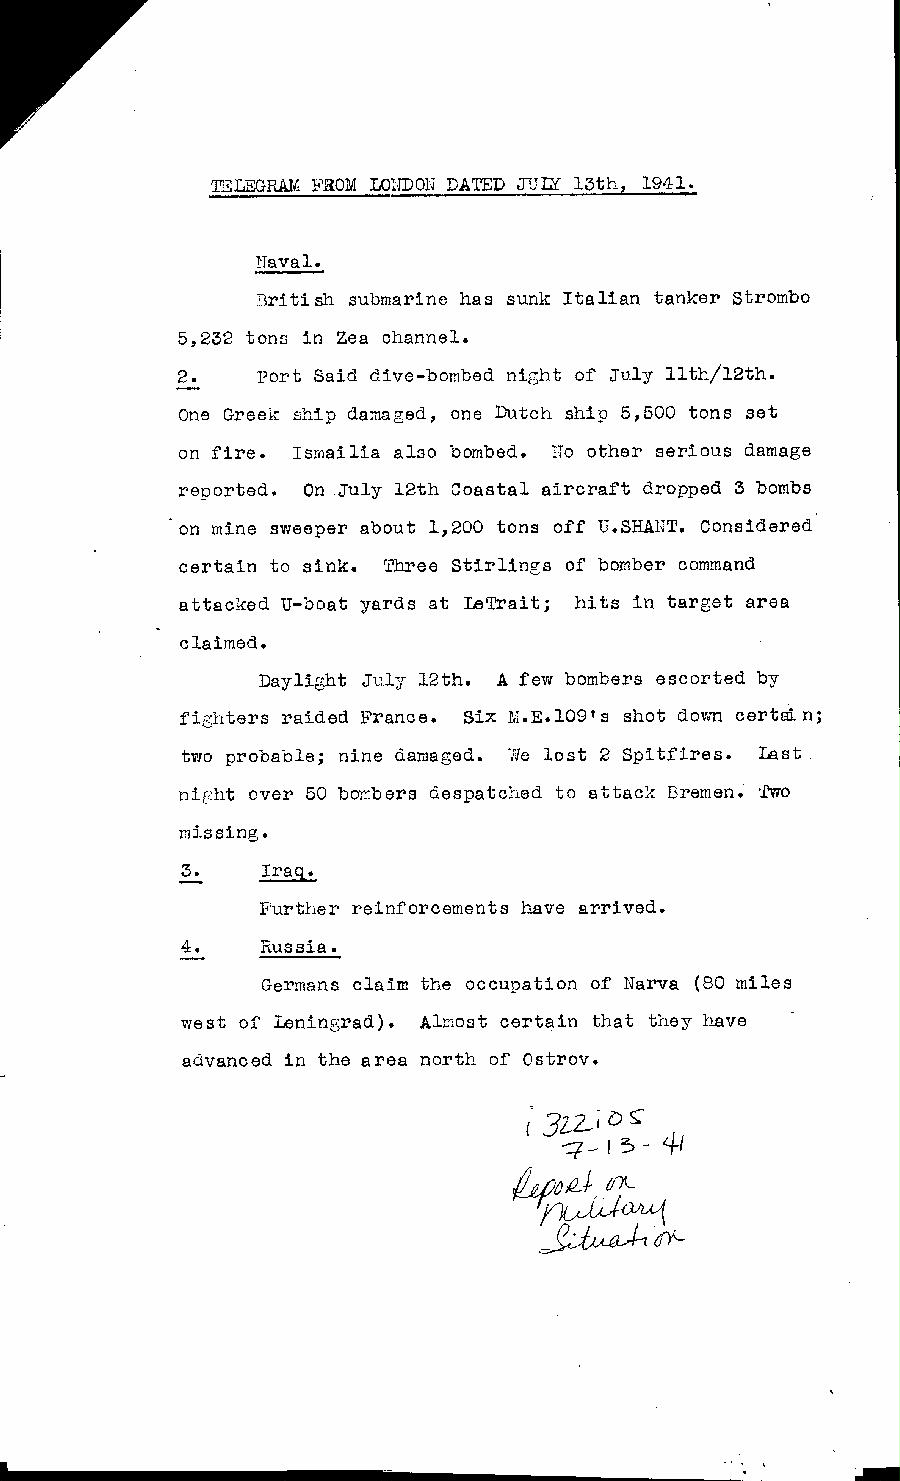 [a322i05.jpg] - Report on military situation 7/13/41